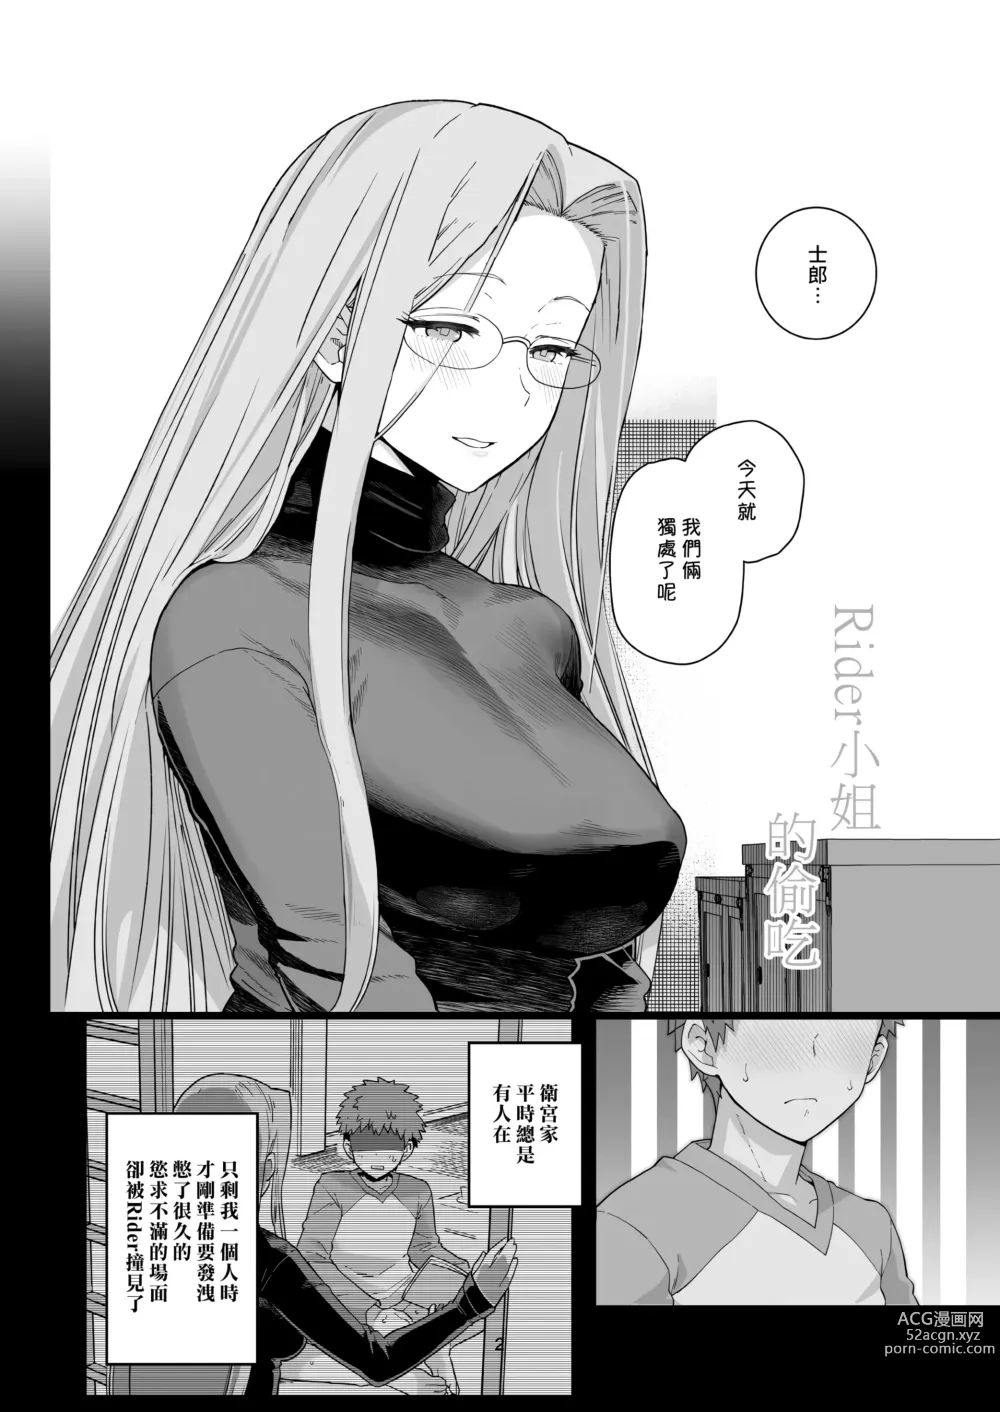 Page 5 of doujinshi Rider小姐的偷吃 (decensored)